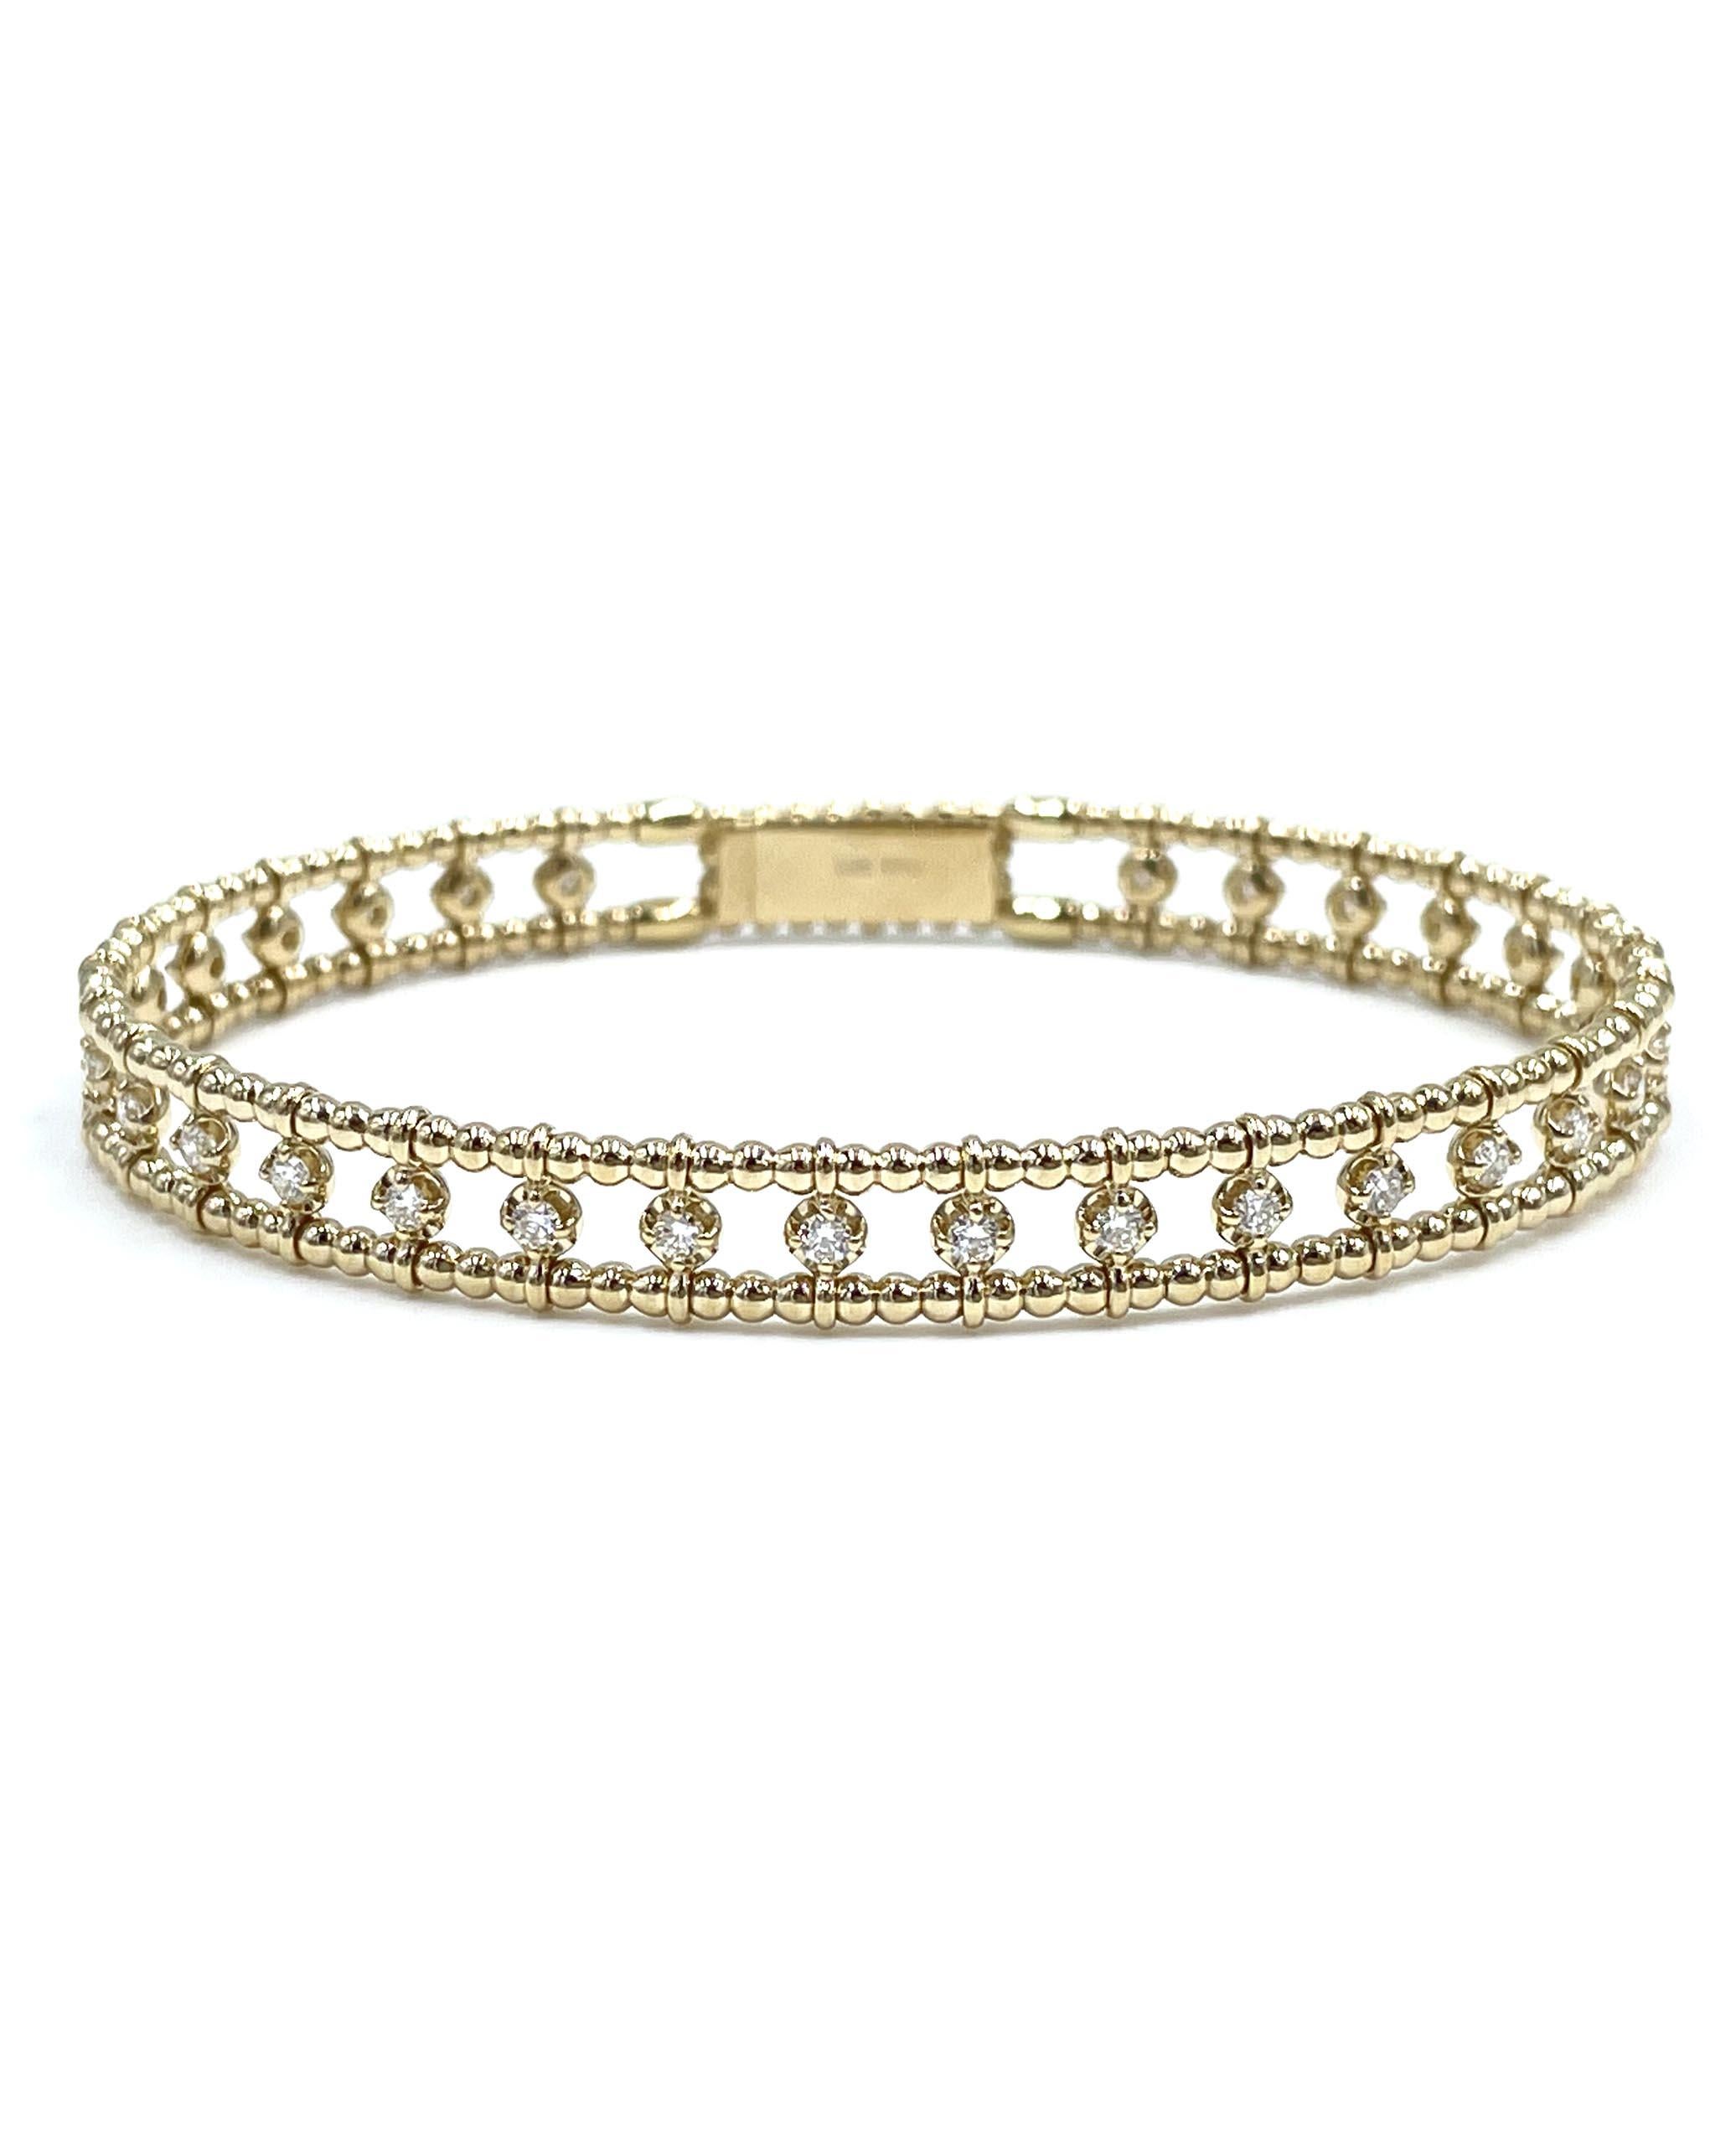 14K yellow gold semi diamond bangle. The bangle features a beaded border and is furnished with 32 round brilliant-cut diamonds weighing 0.75 carats total. 

- 6.6mm wide.
- Diamonds are G color, VS clarity.
- 6.5 inches.